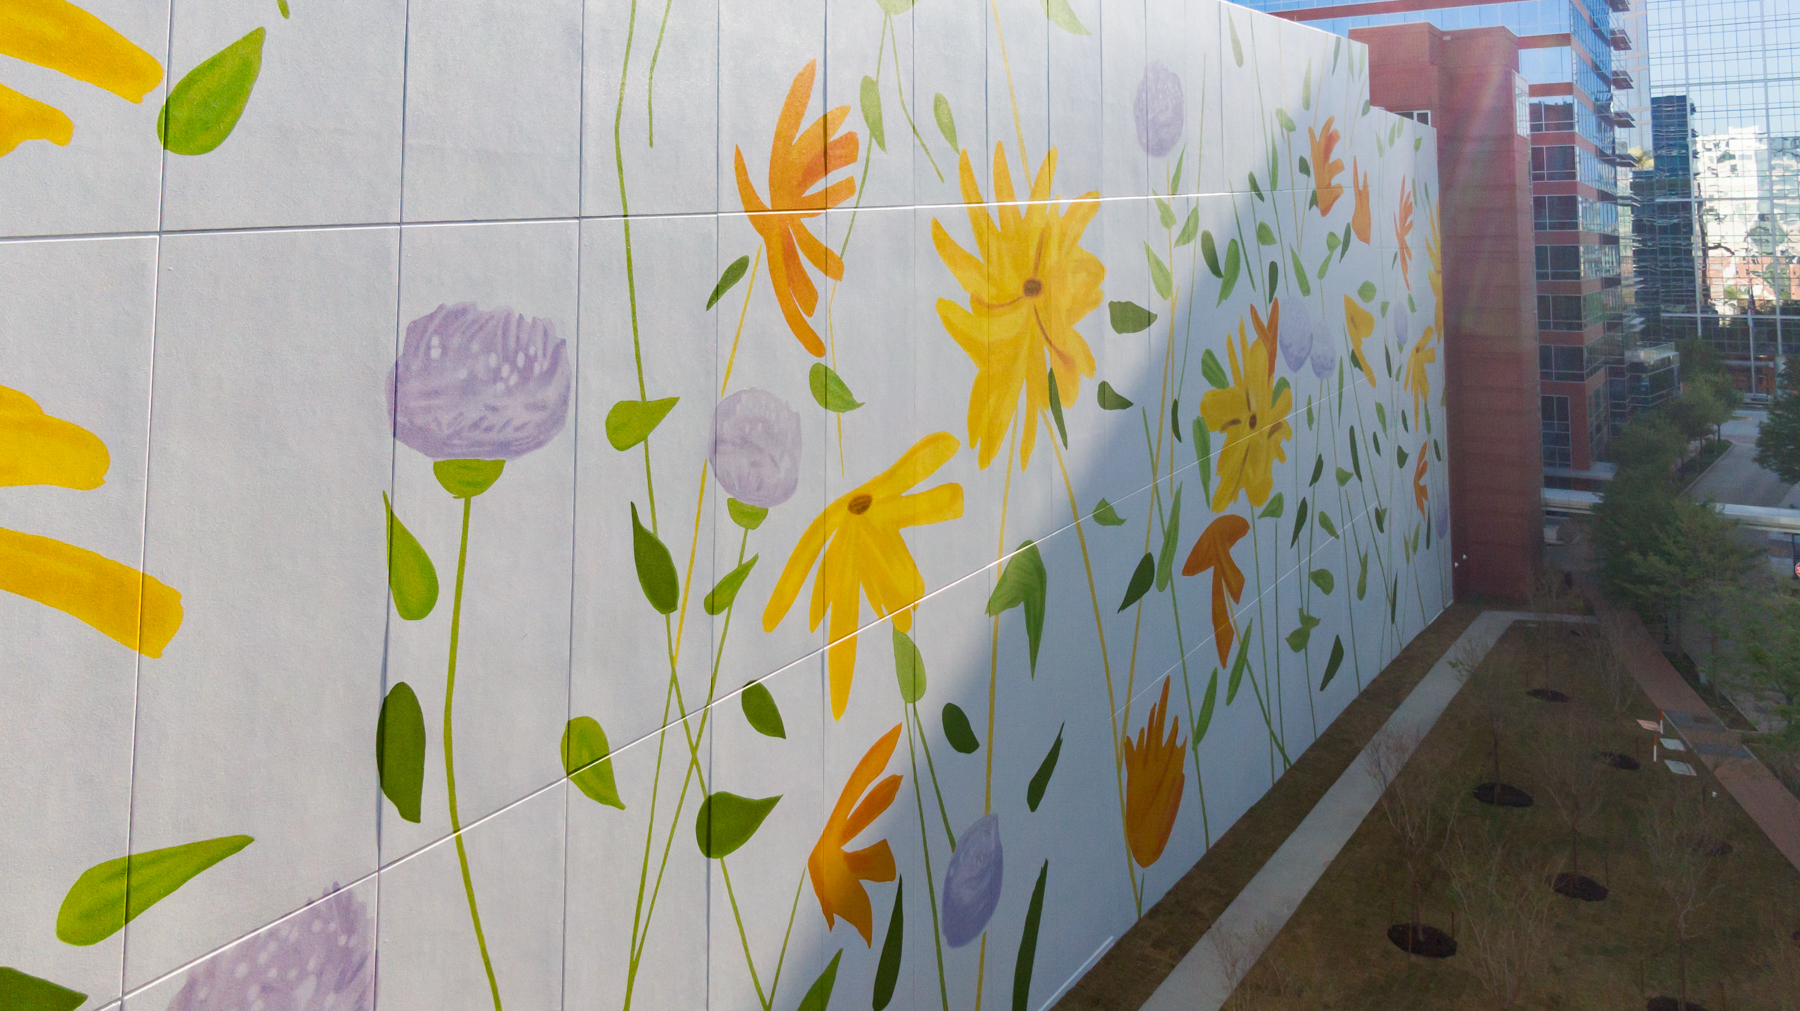 Colossal Media hand-painted floral mural for the Woodlands in Texas with art by Alex Katz.